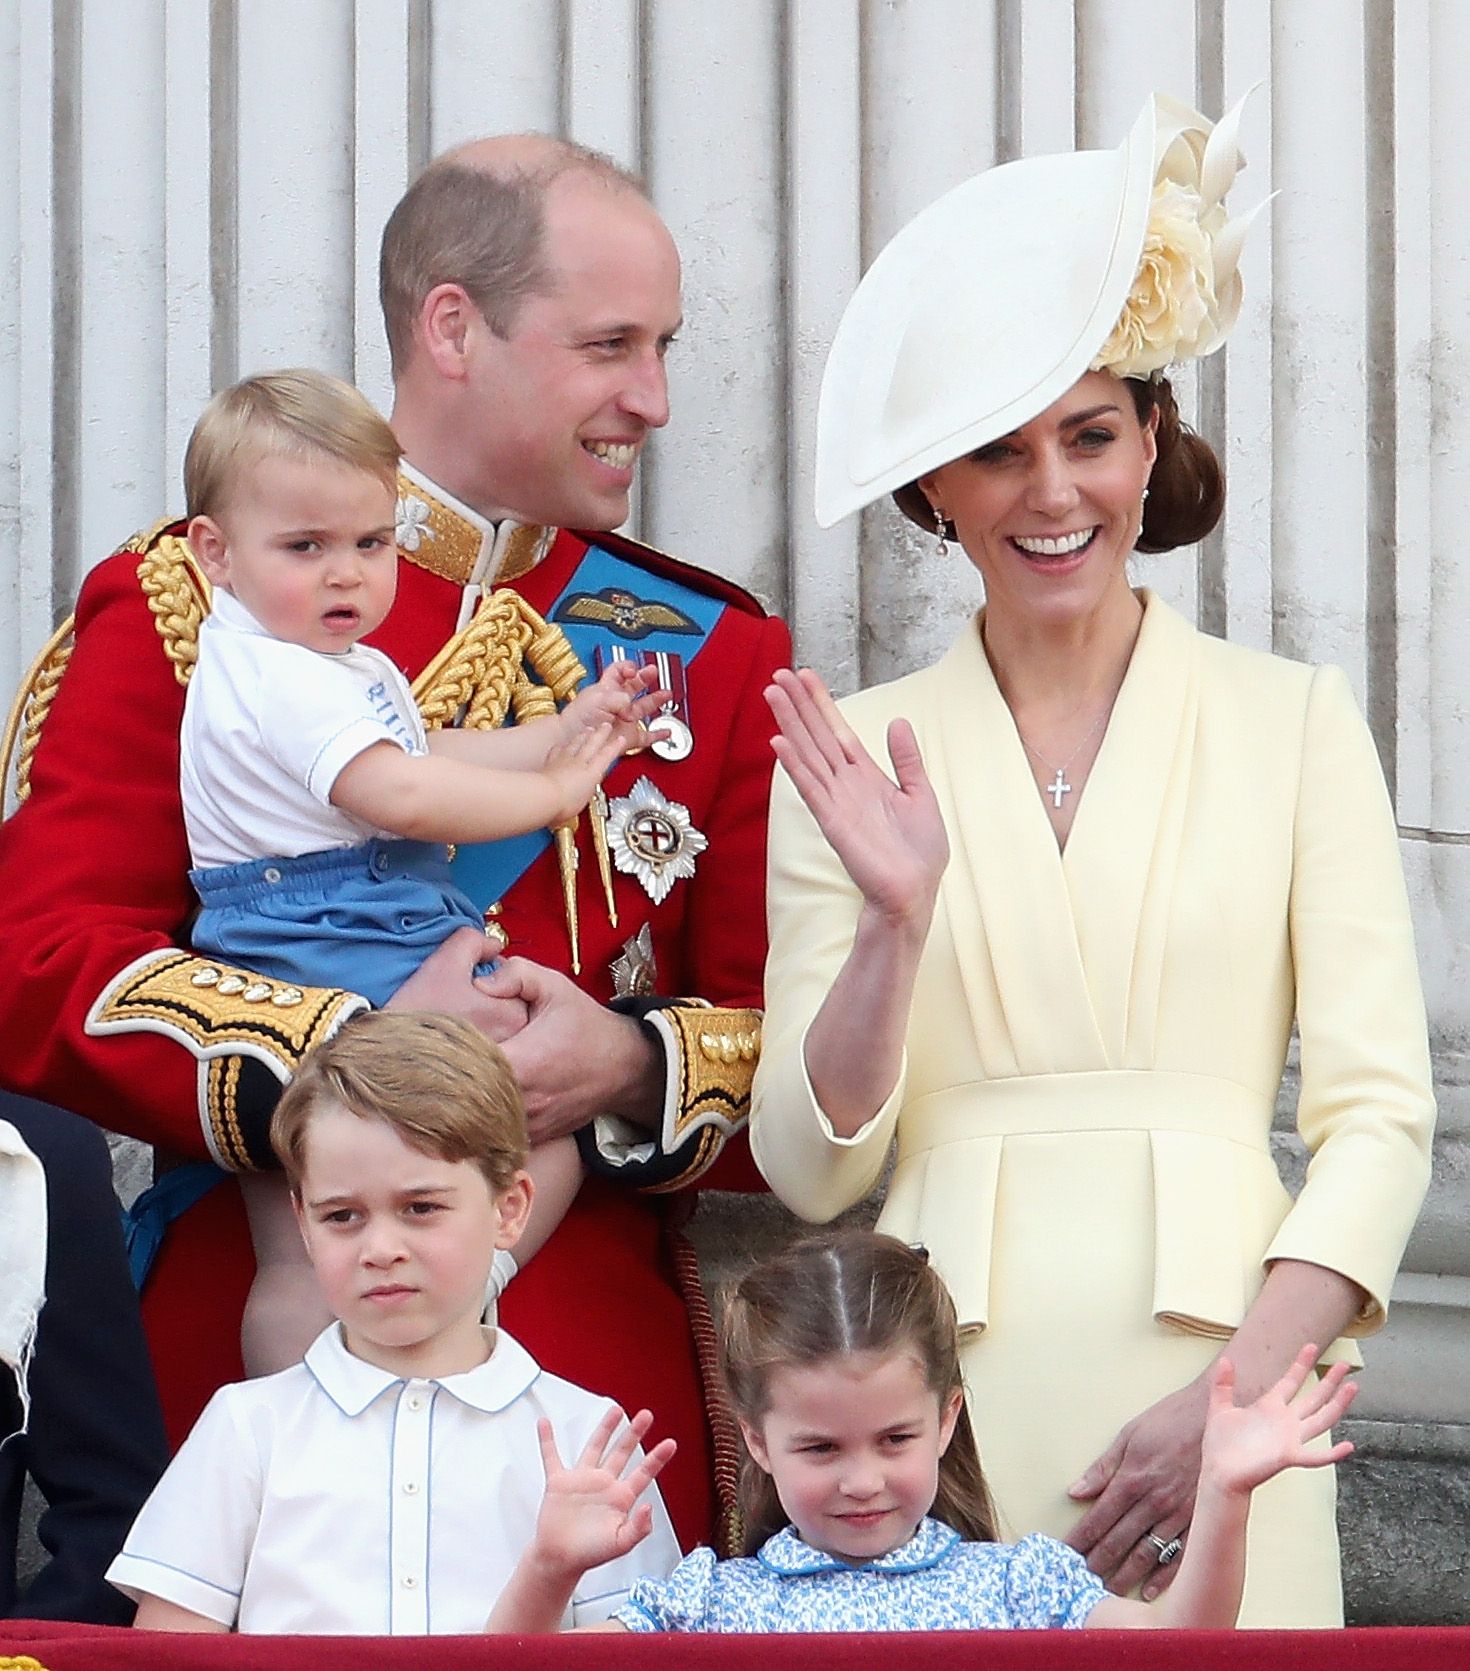 Prince William and Kate Middleton with Prince Louis, Prince George, and Princess Charlotte during Trooping The Colou, on June 8, 2019 in London, England | Photo: Chris Jackson/Getty Images